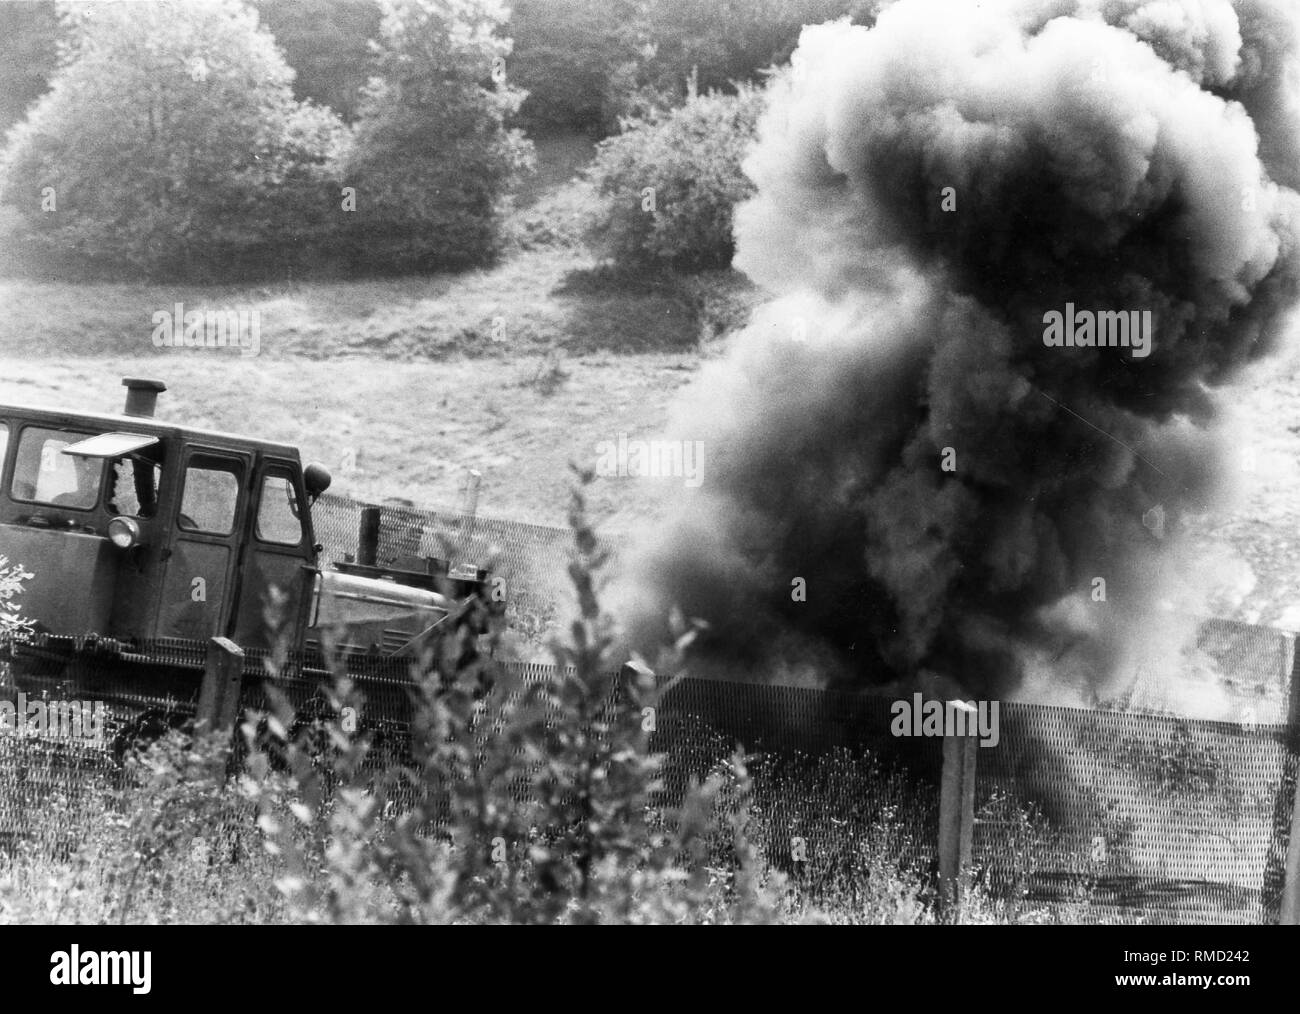 One of the mines explodes during the clearance of anti-personnel mines in the death strip on the border in the Eichsfeld. Stock Photo